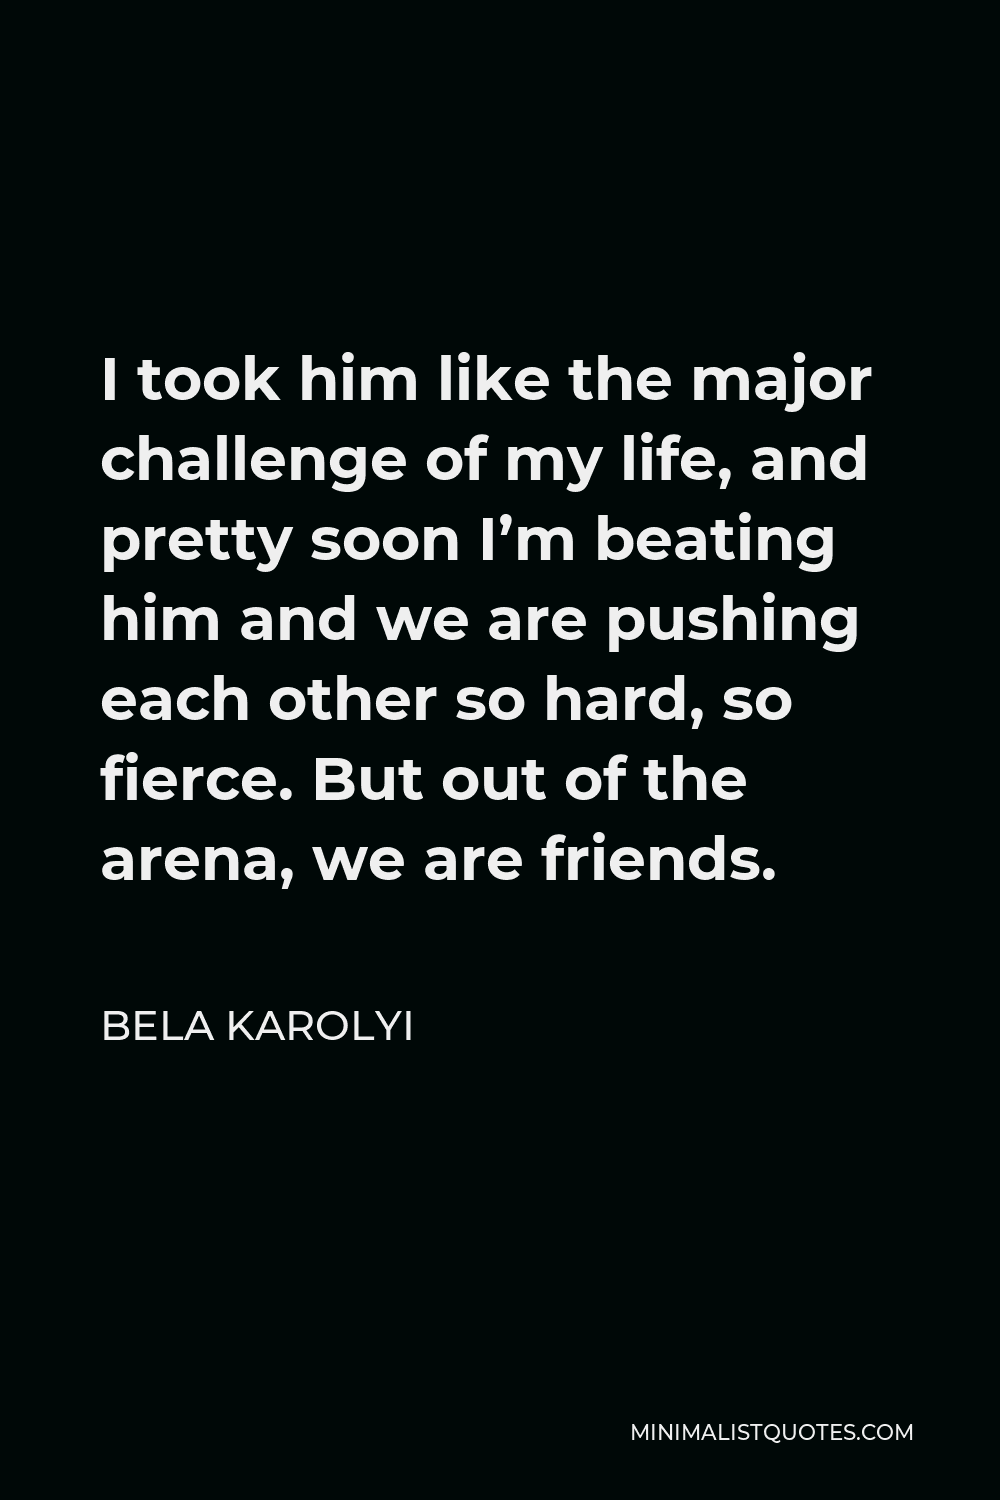 Bela Karolyi Quote - I took him like the major challenge of my life, and pretty soon I’m beating him and we are pushing each other so hard, so fierce. But out of the arena, we are friends.